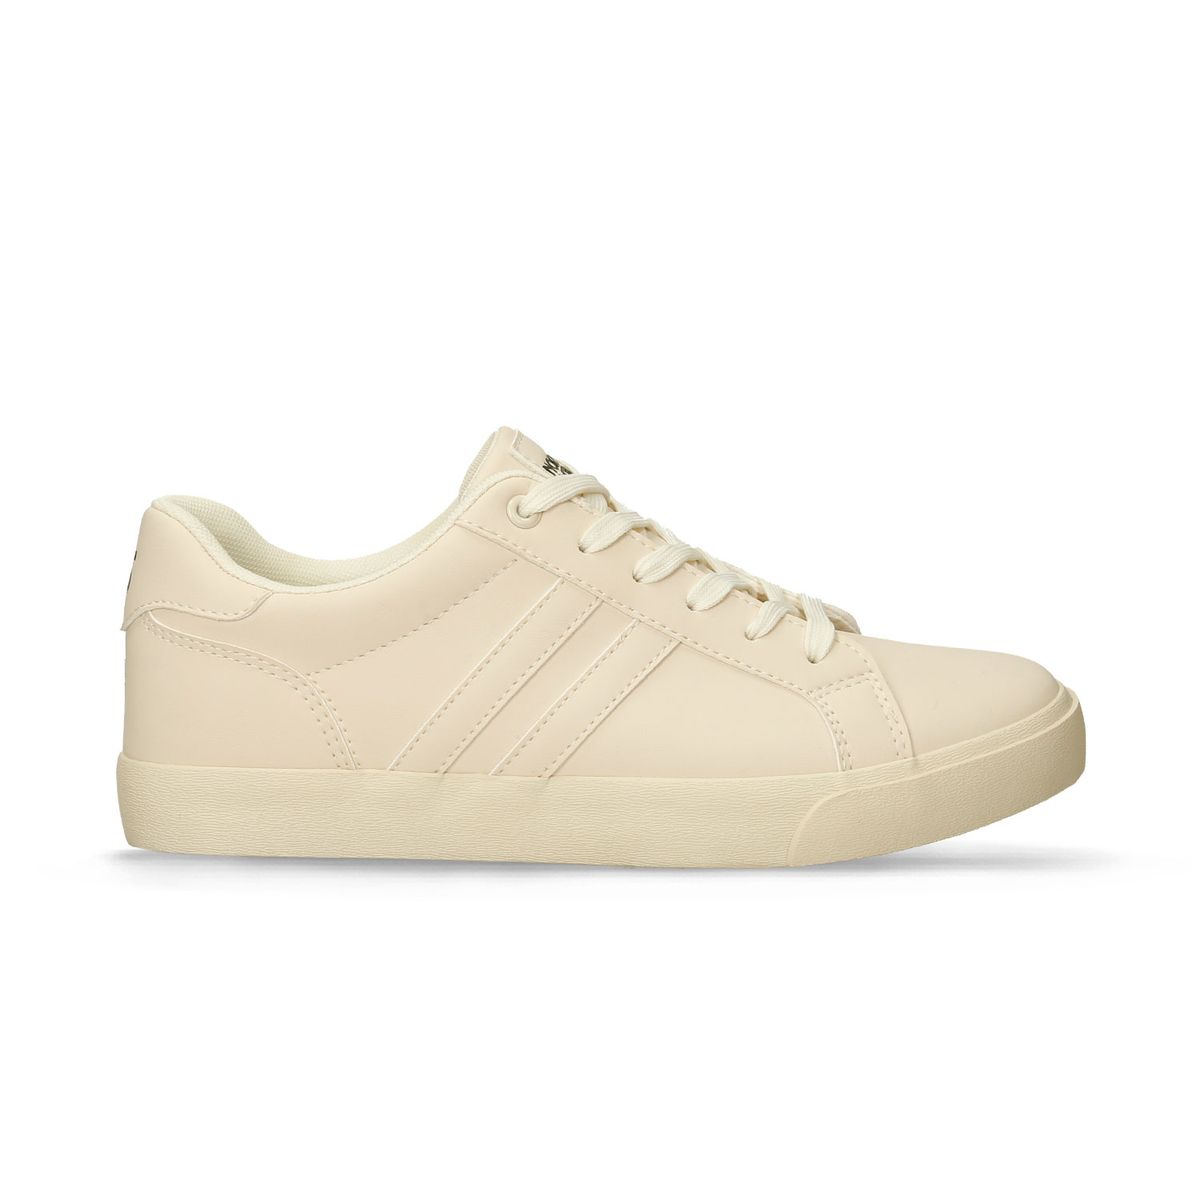 Tenis Casuales Beige North Star Janko Ns Hombre